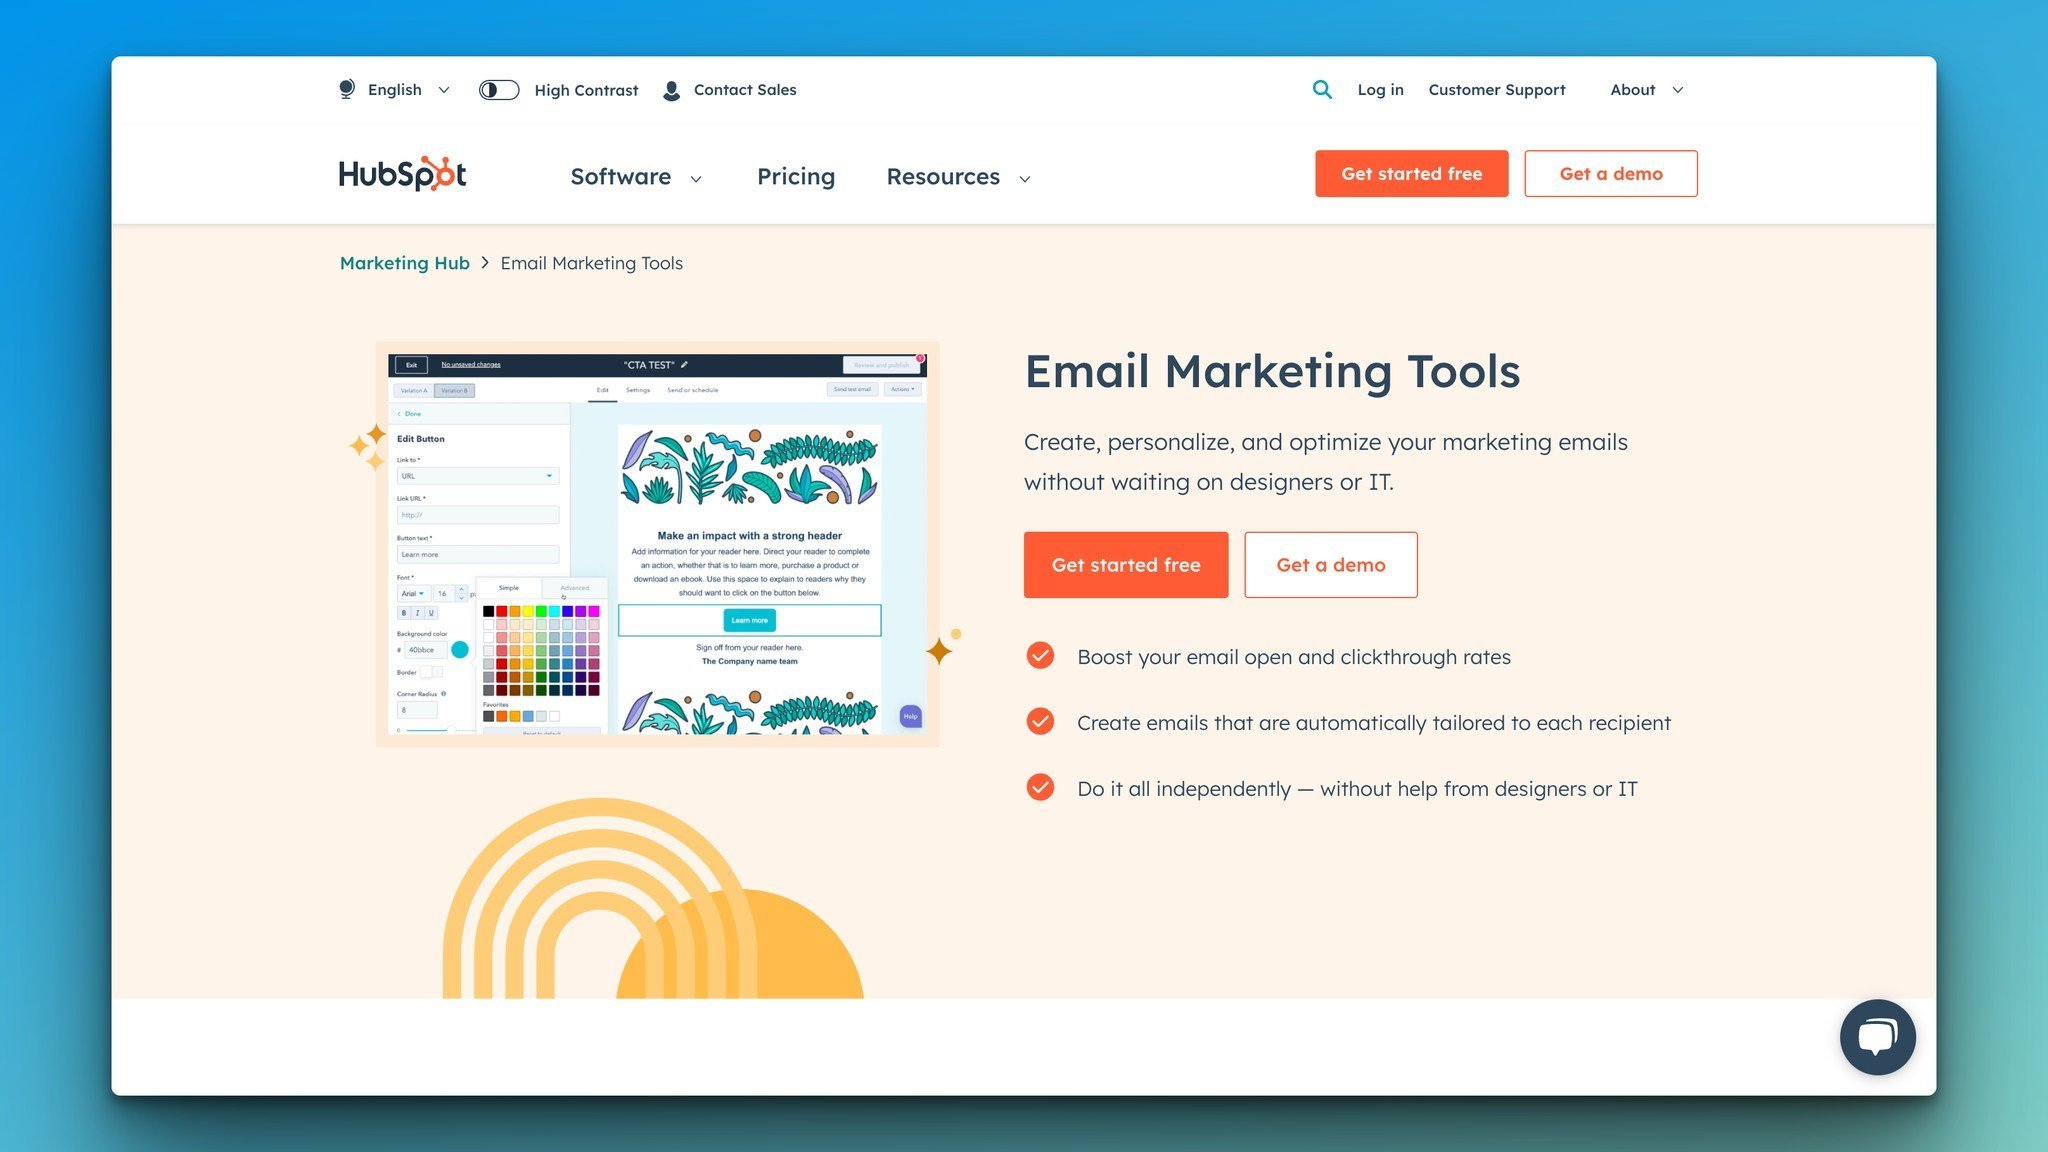 Hubspot’s homepage with the product preview on the left and Email Marketing Tools headline on the right followed by Get started free and Get a demo buttons